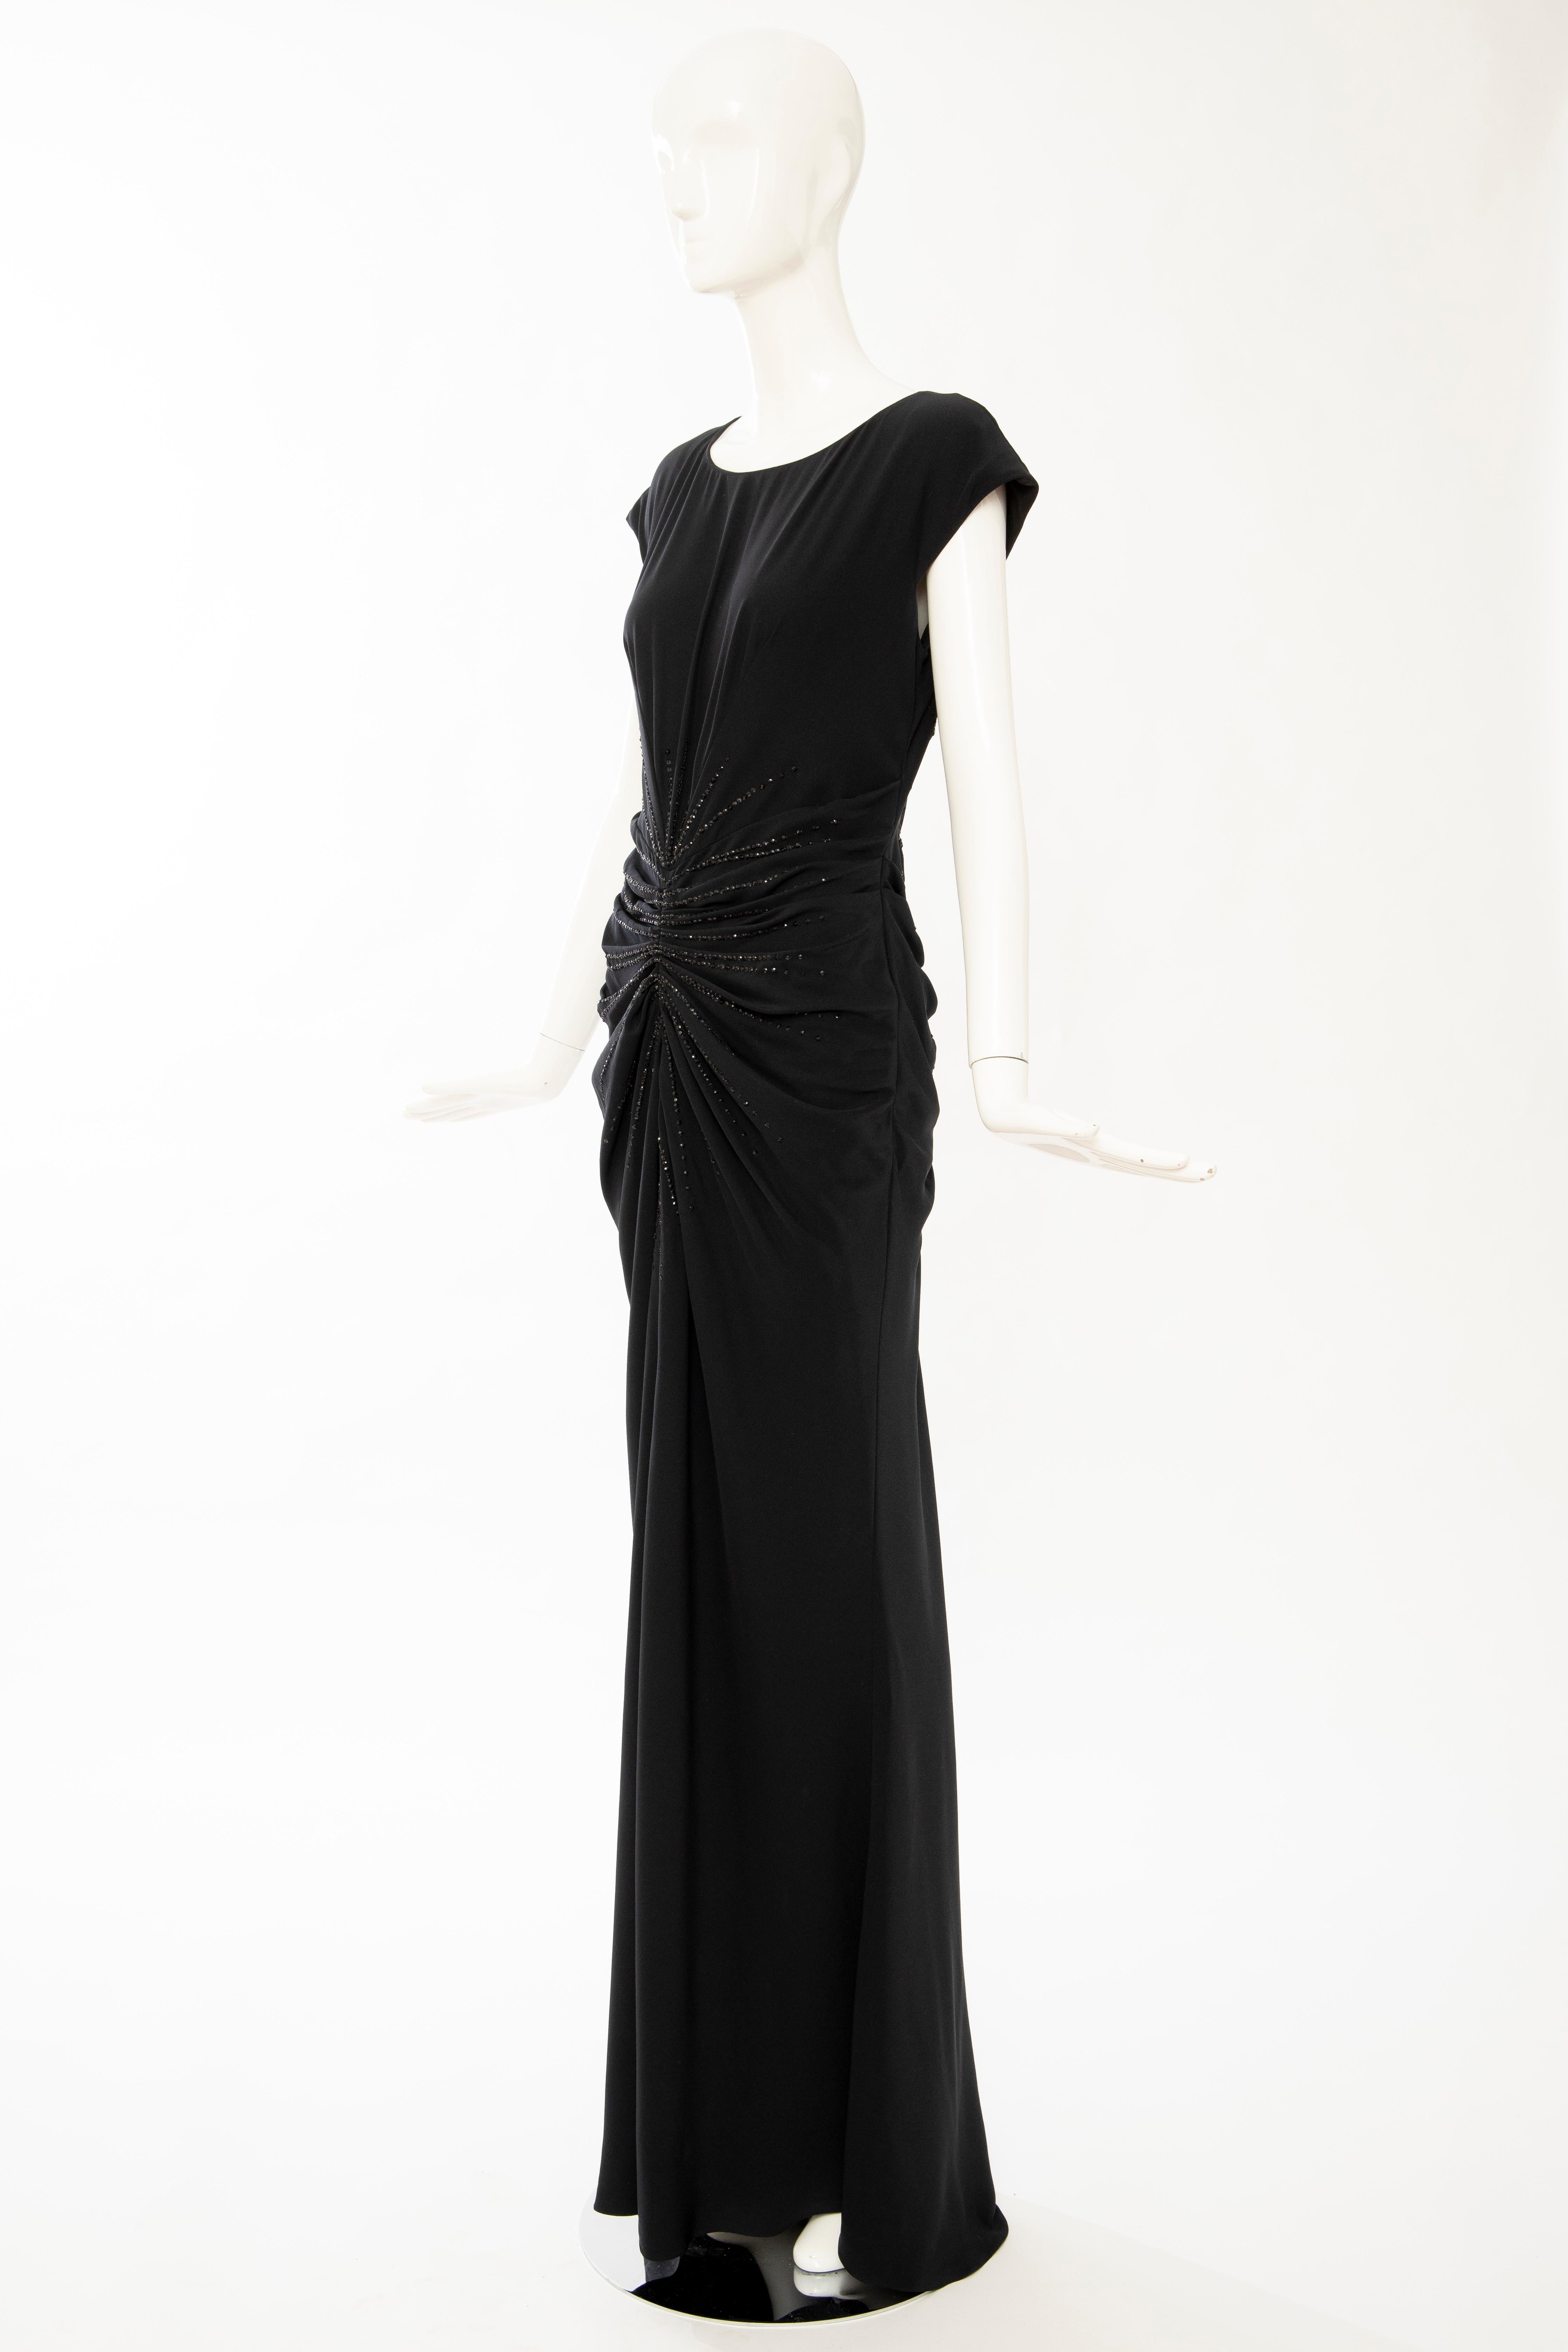 John Galliano for Christian Dior Black Embroidered Evening Dress, Spring 2008 10